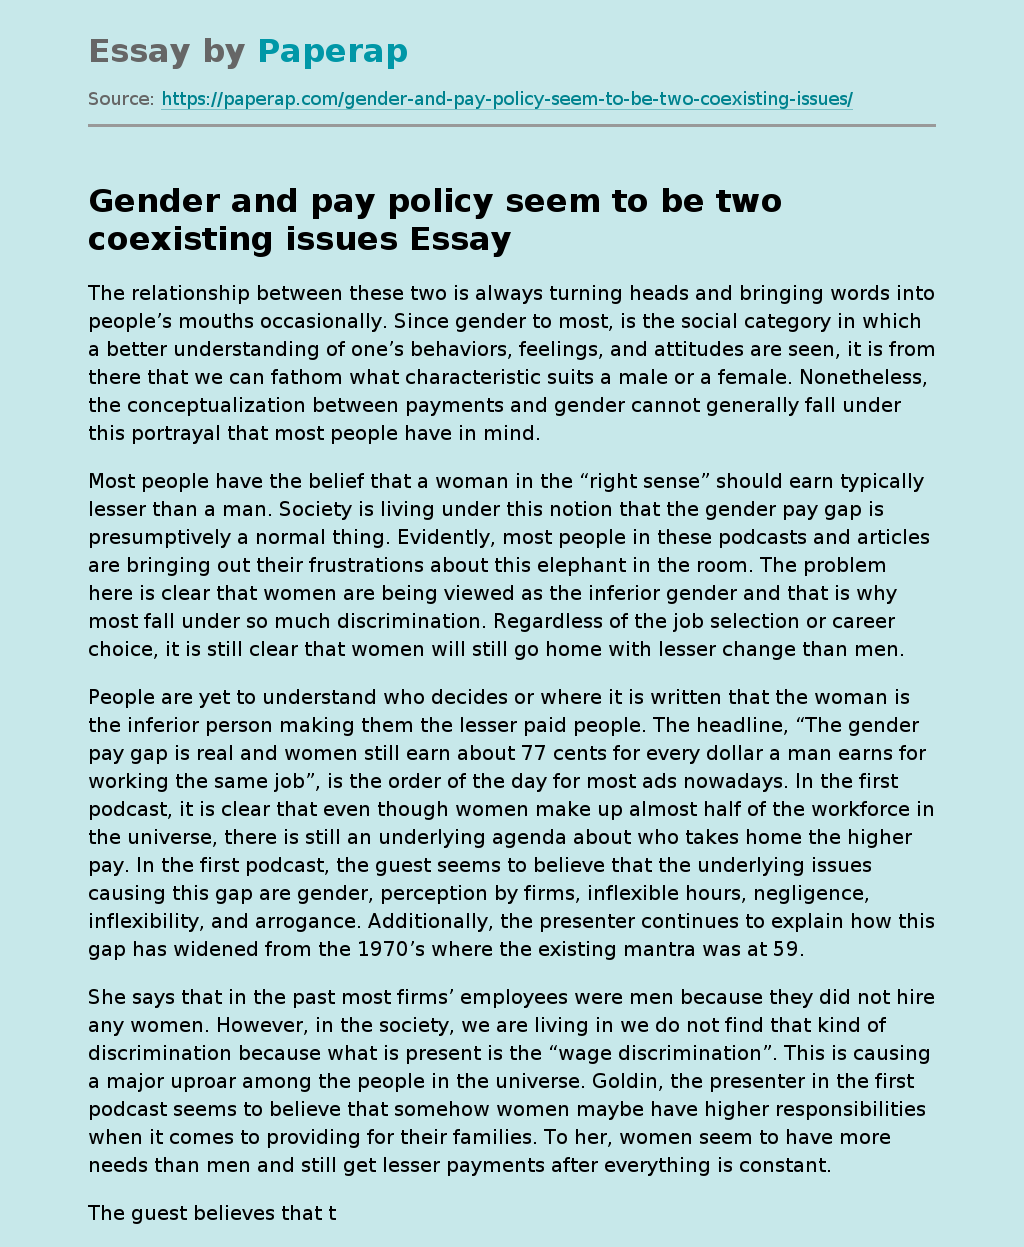 Gender and pay policy seem to be two coexisting issues